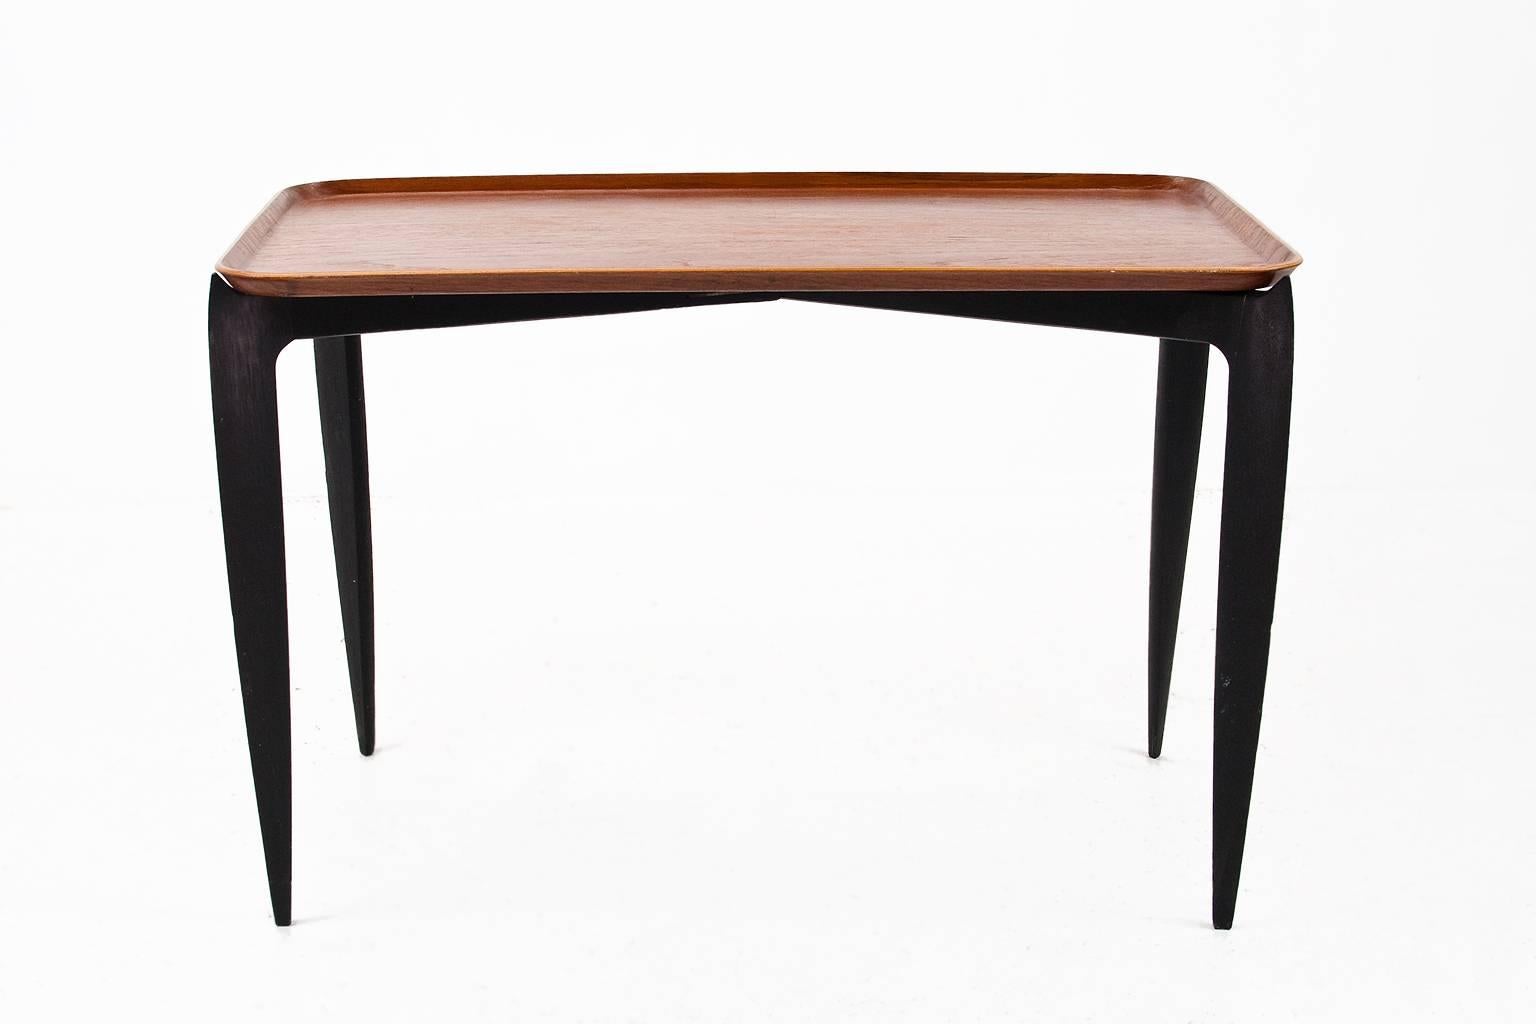 Original 1950s foldable side table, light and elegant, designed by Svend Åge Willumsen and H. Engholm for Fritz Hansen, Denmark. Brand and stamp present.

This is a rare rectangular version table tray or side table, with a spider legs folding base